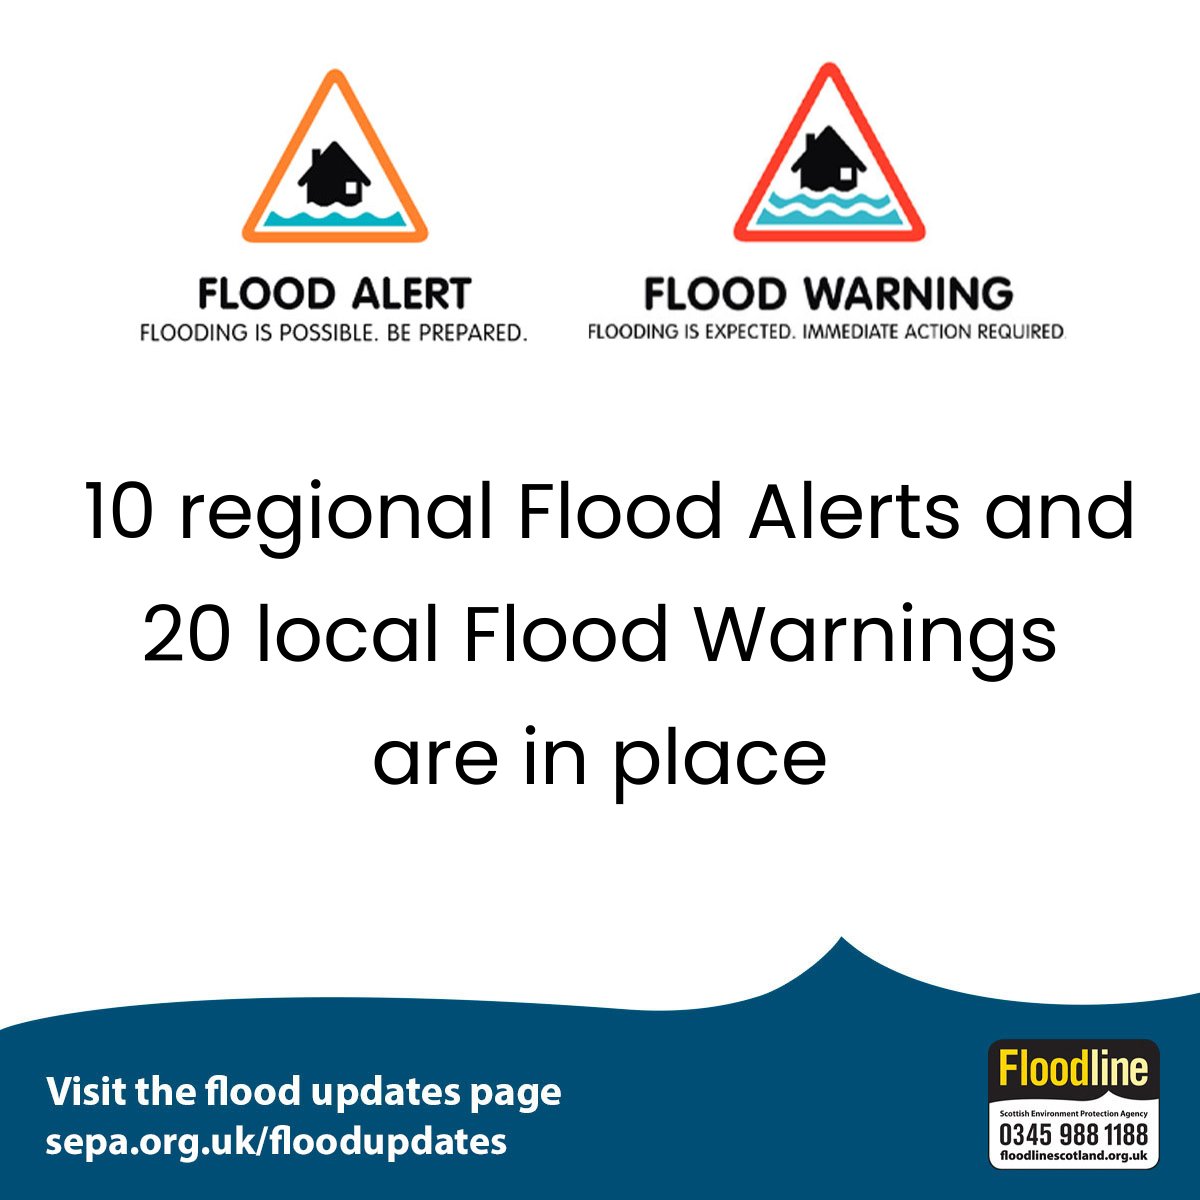 🌧️ We're expecting flooding impacts across northern Scotland today as rivers respond to heavy rain. ❗ Rivers including the Spey, Beauly, Conon, Ness and others across the Great Glen will continue to rise during Monday and Tuesday. ⚠️ Take care when travelling - driving…